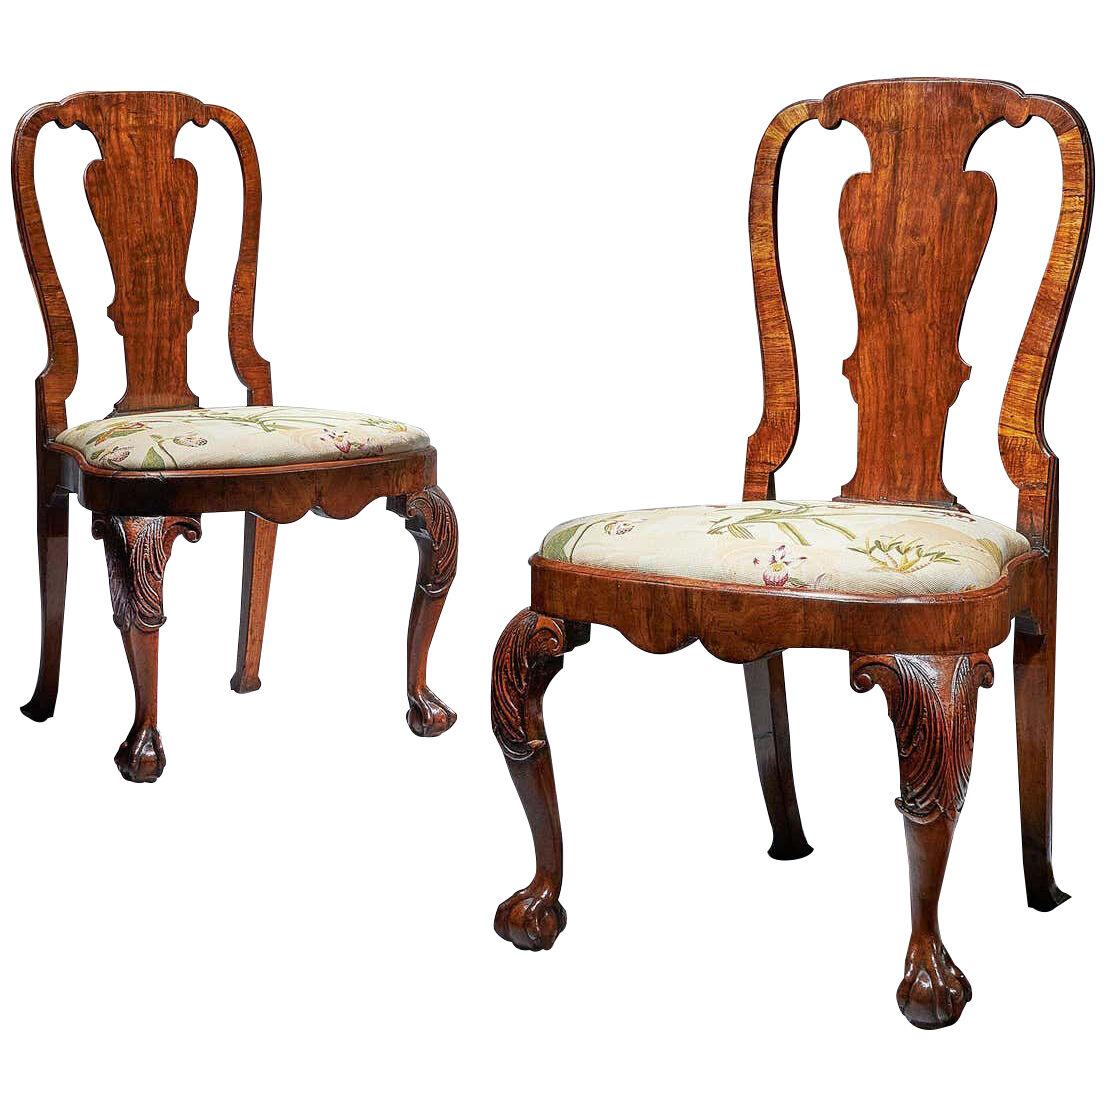 Pair of 18th Century George I Carved Walnut Chairs